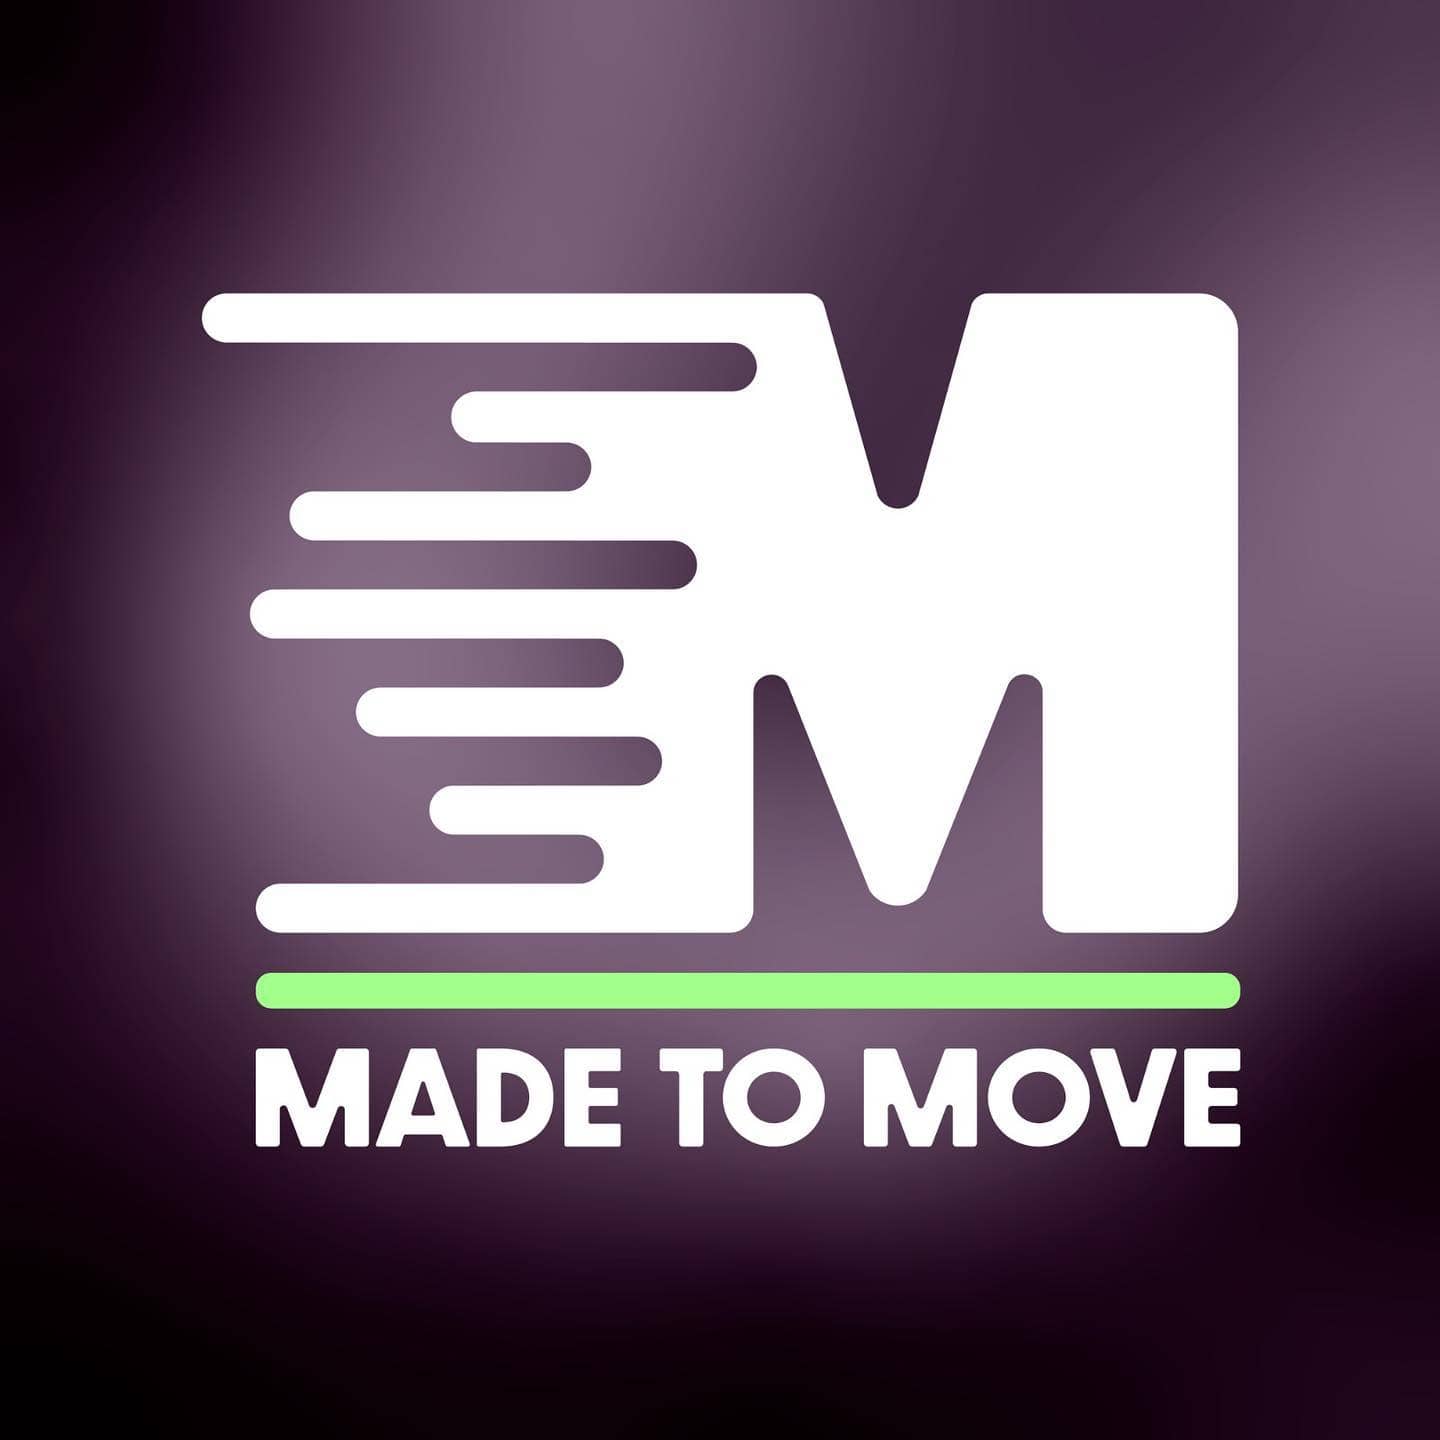 We're delighted to be able to offer a post-race massage service from our friends at Made to Move
...